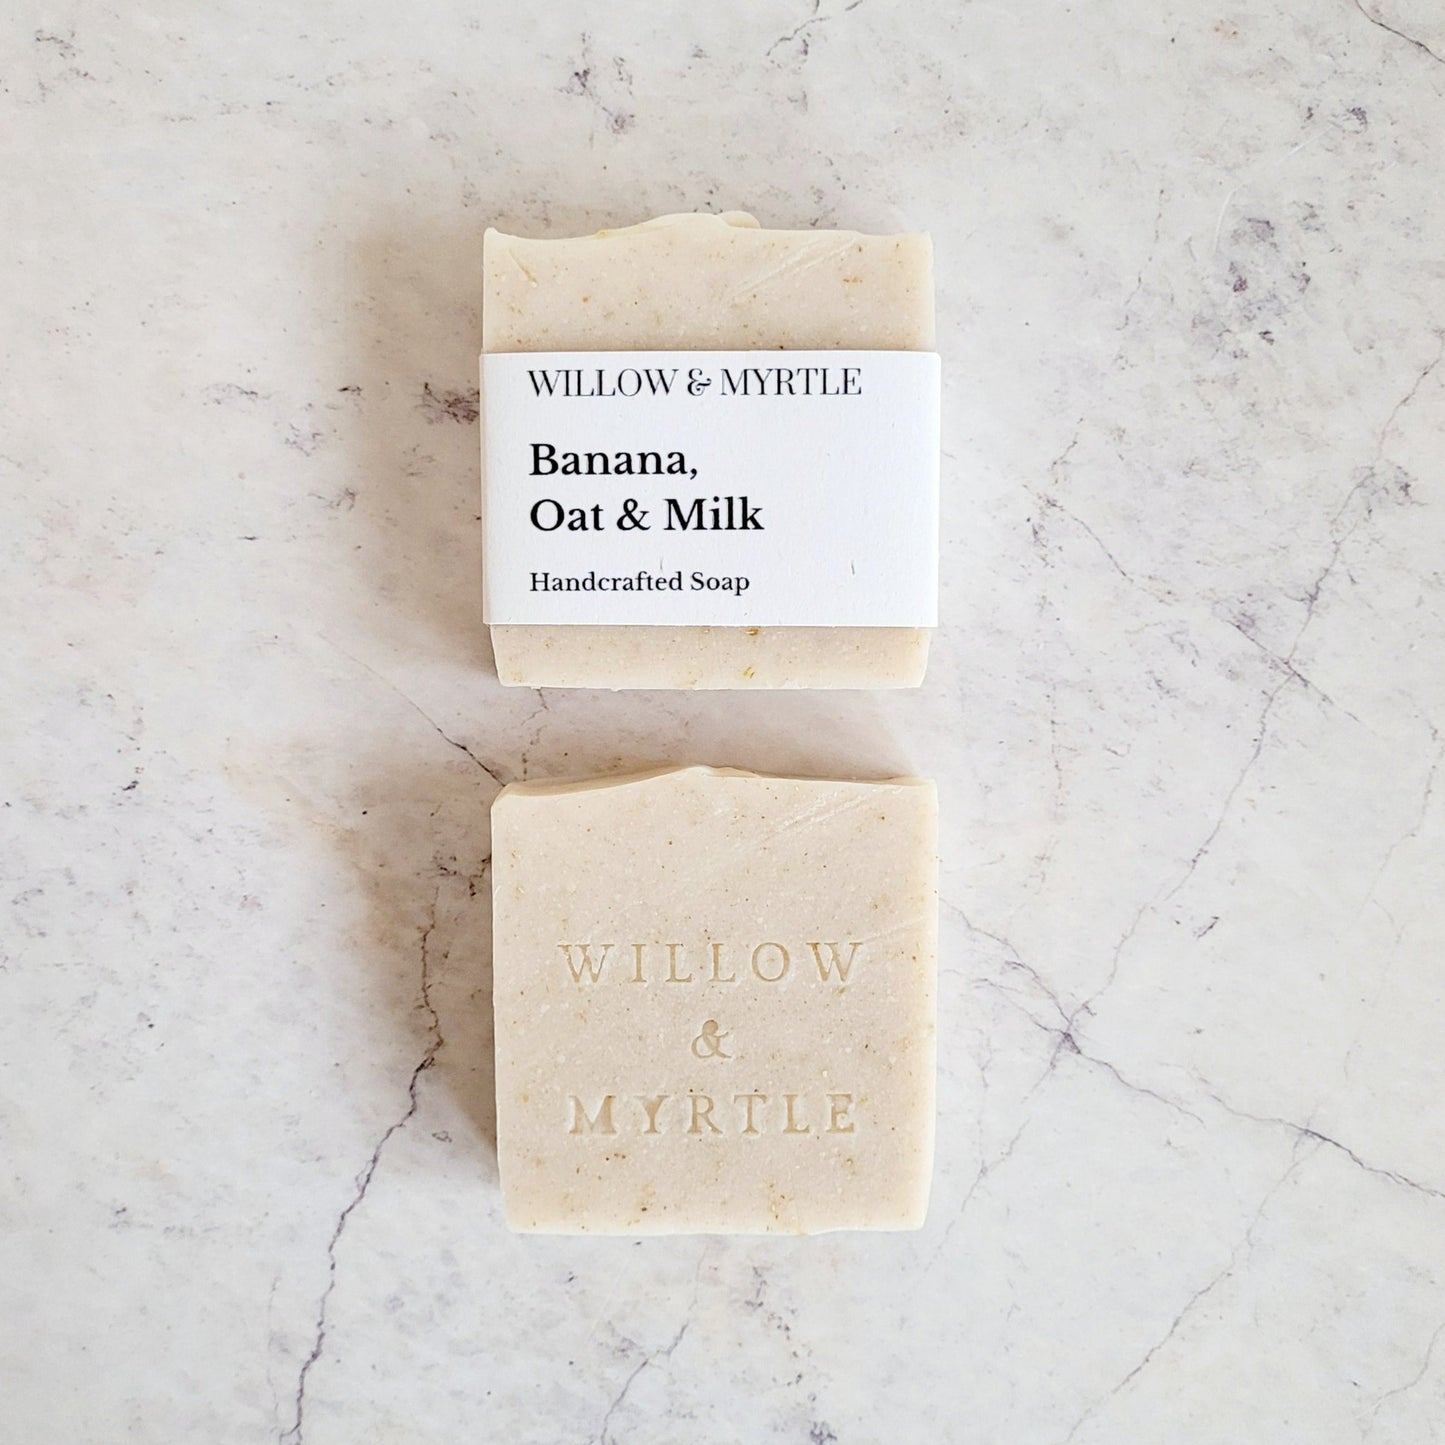 Banana oat and coconut milk soap bar. Unfragranced soap bar ideal for sensitive skin. It is rich, creamy and skin nourishing. Made using the traditional cold process soap making method, it is handmade, vegan and all natural.